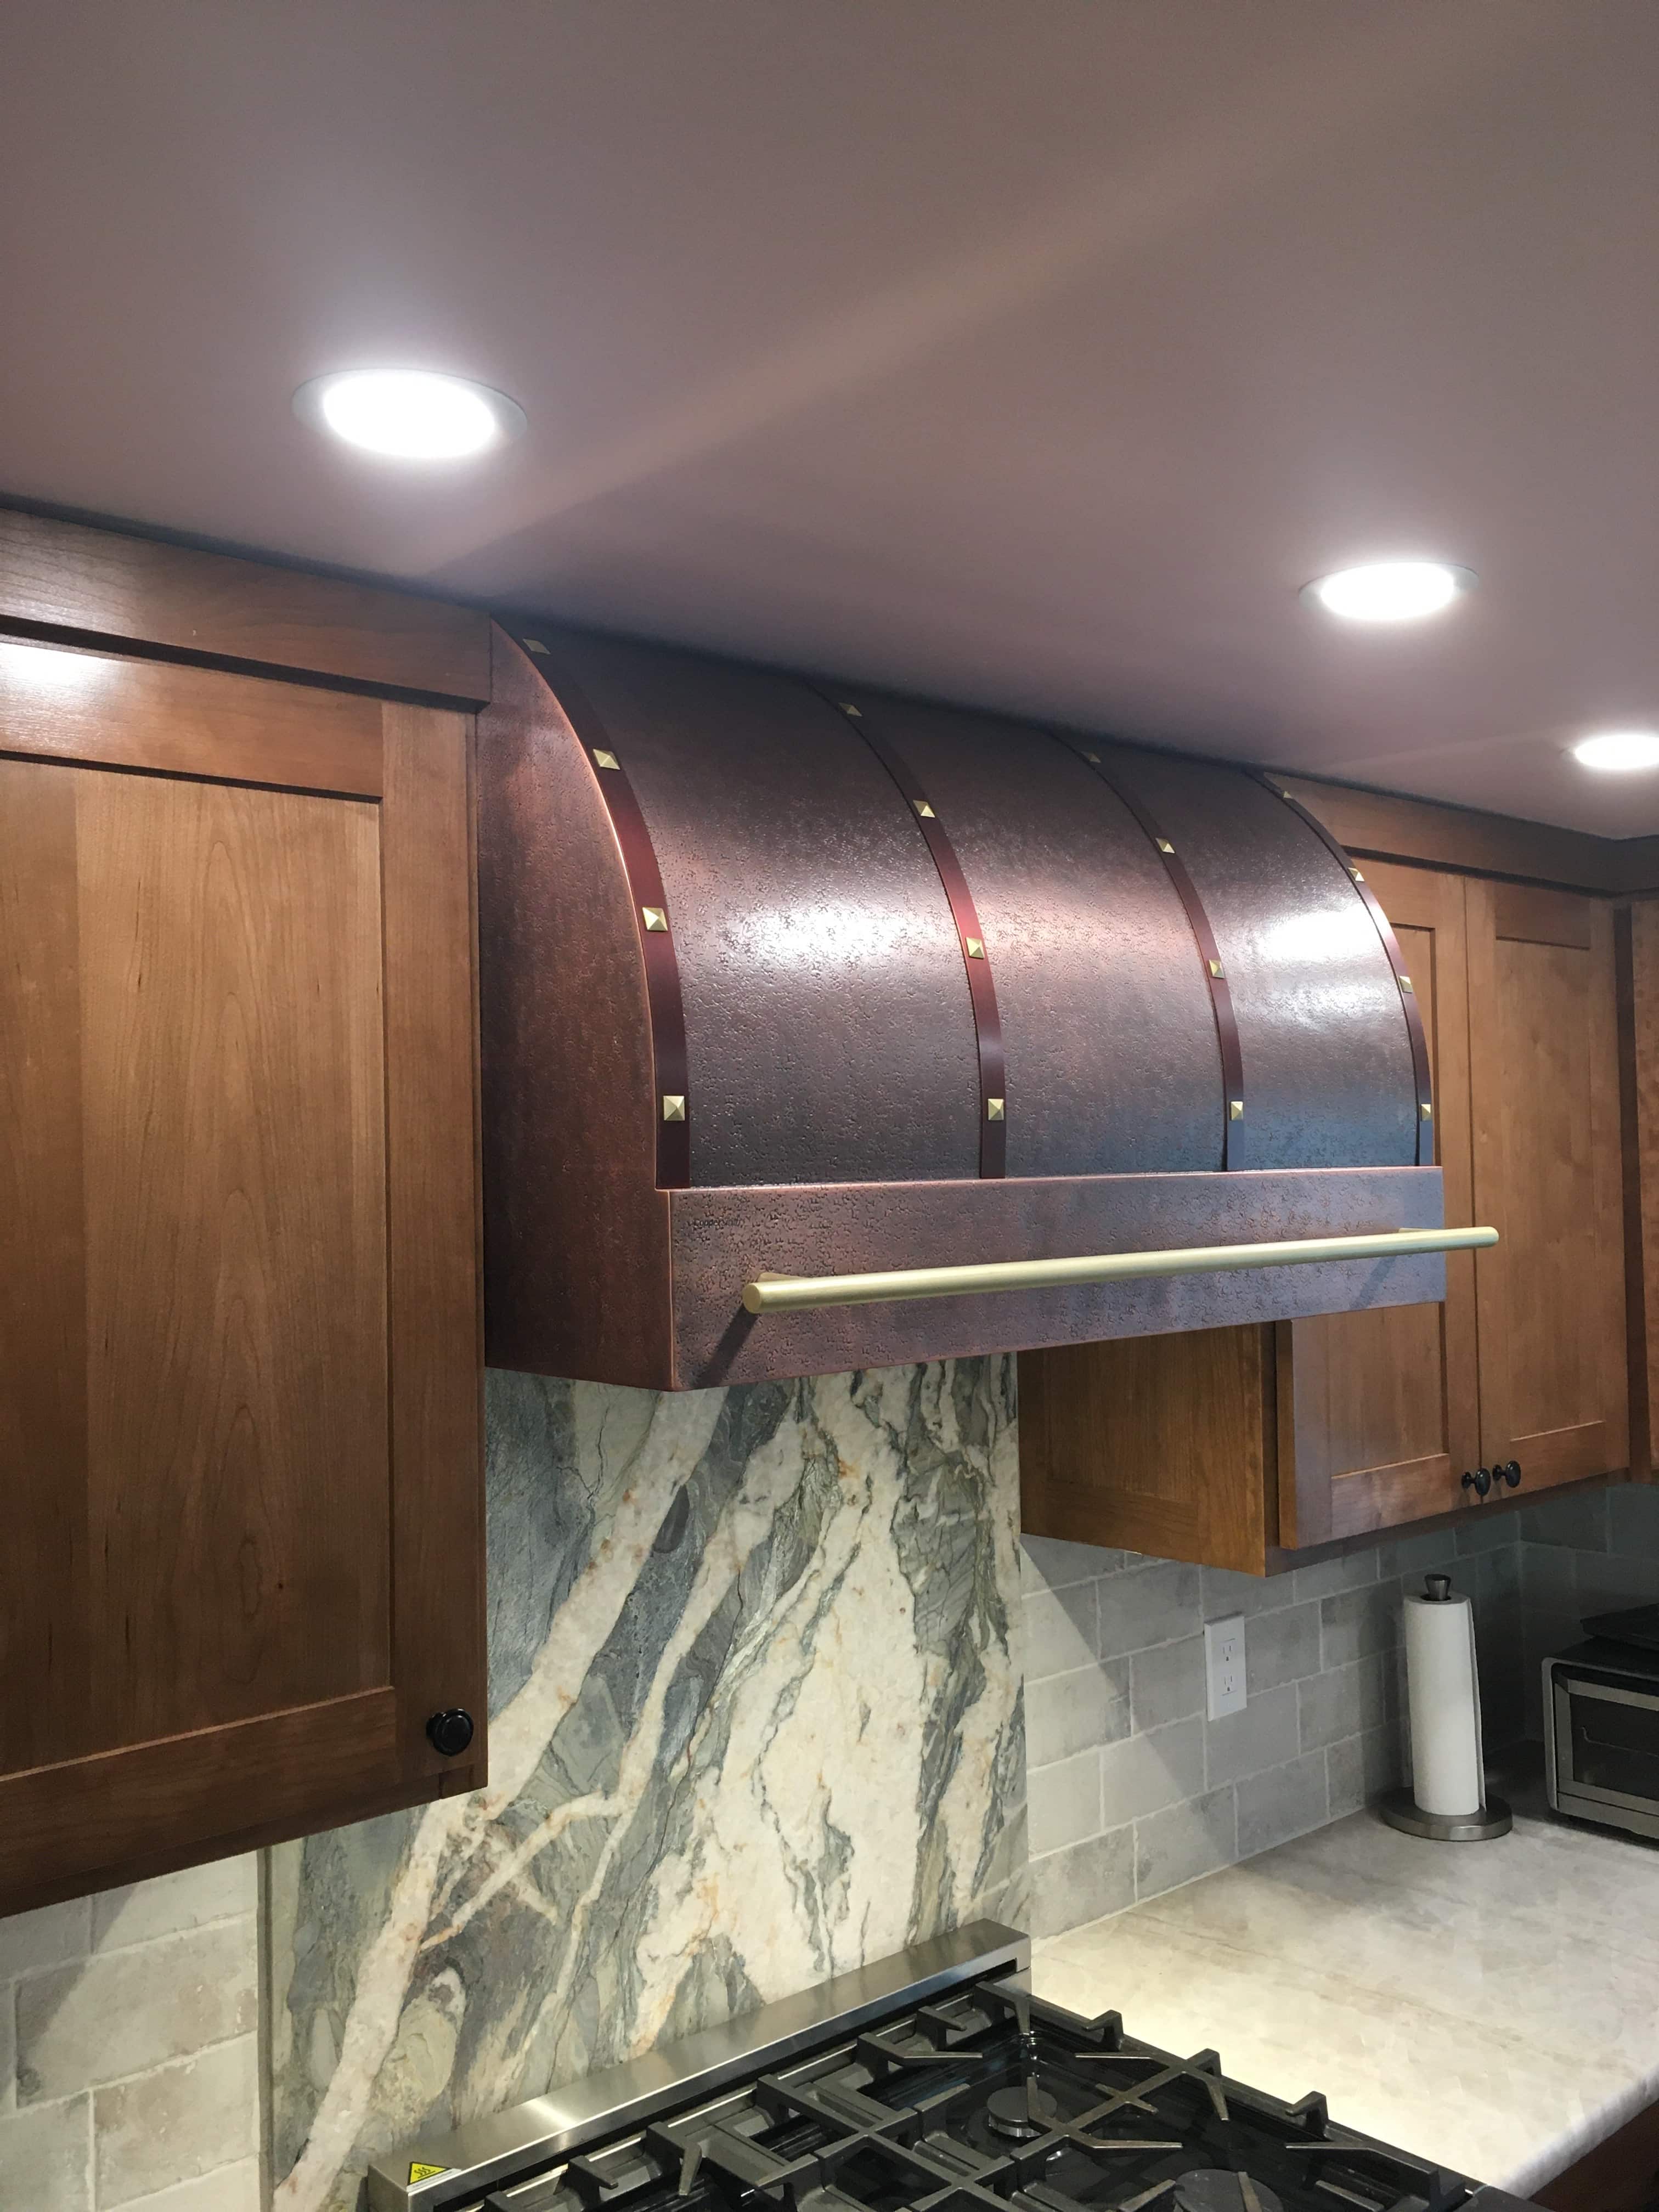 CopperSmith Premier PR4 Light Antique Copper Kitchen Range Hood with Rose Copper Straps Matte Brass Rivets and Pot Rail features wood cabinetry and marble backsplash